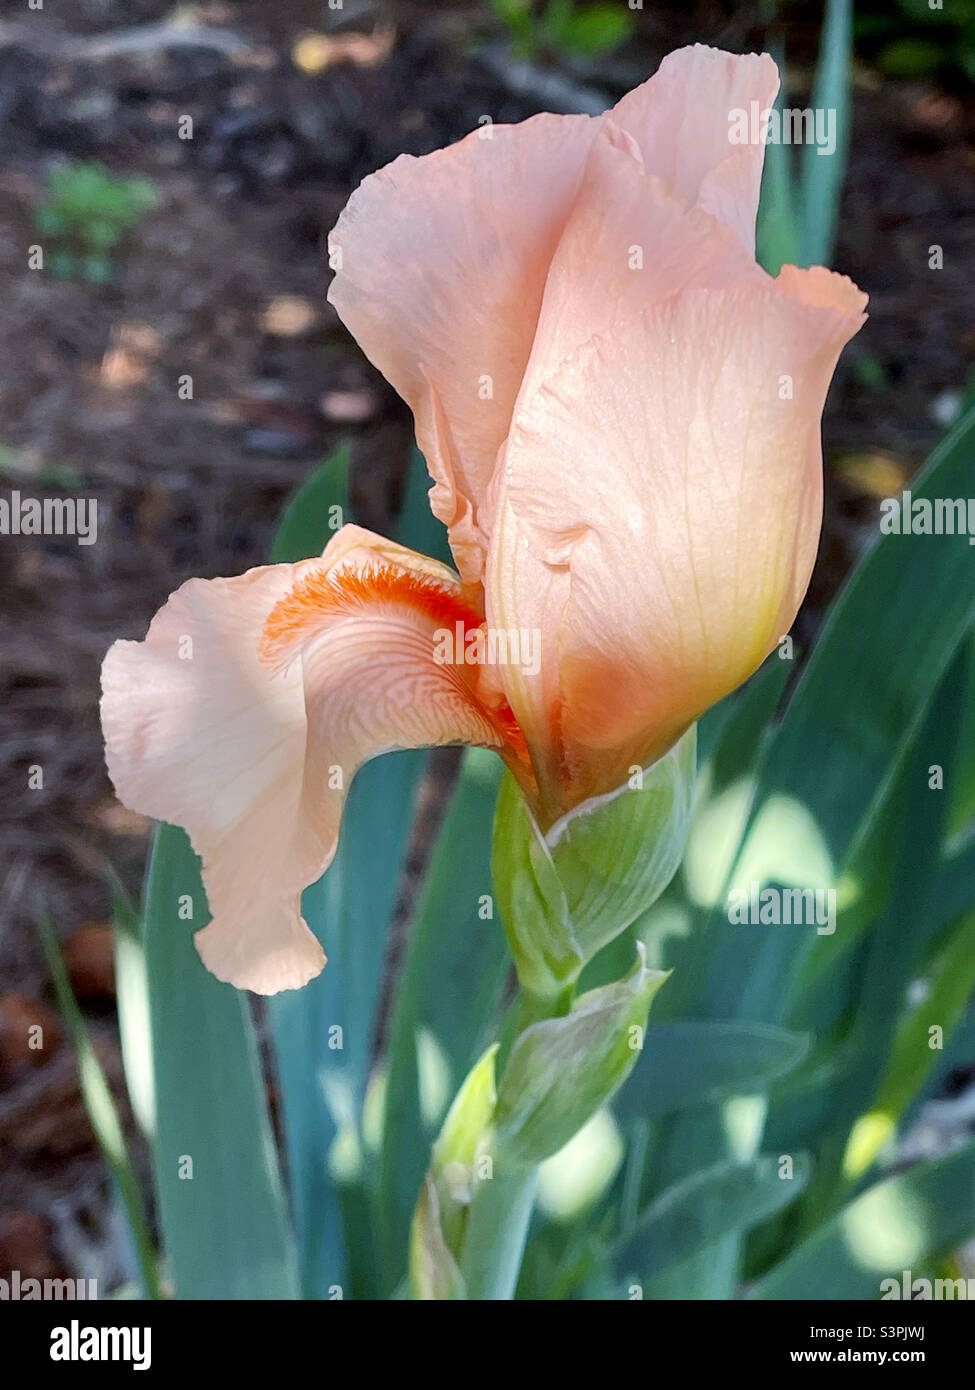 Peach colored bearded Iris flower blossom in an outdoor garden. Stock Photo